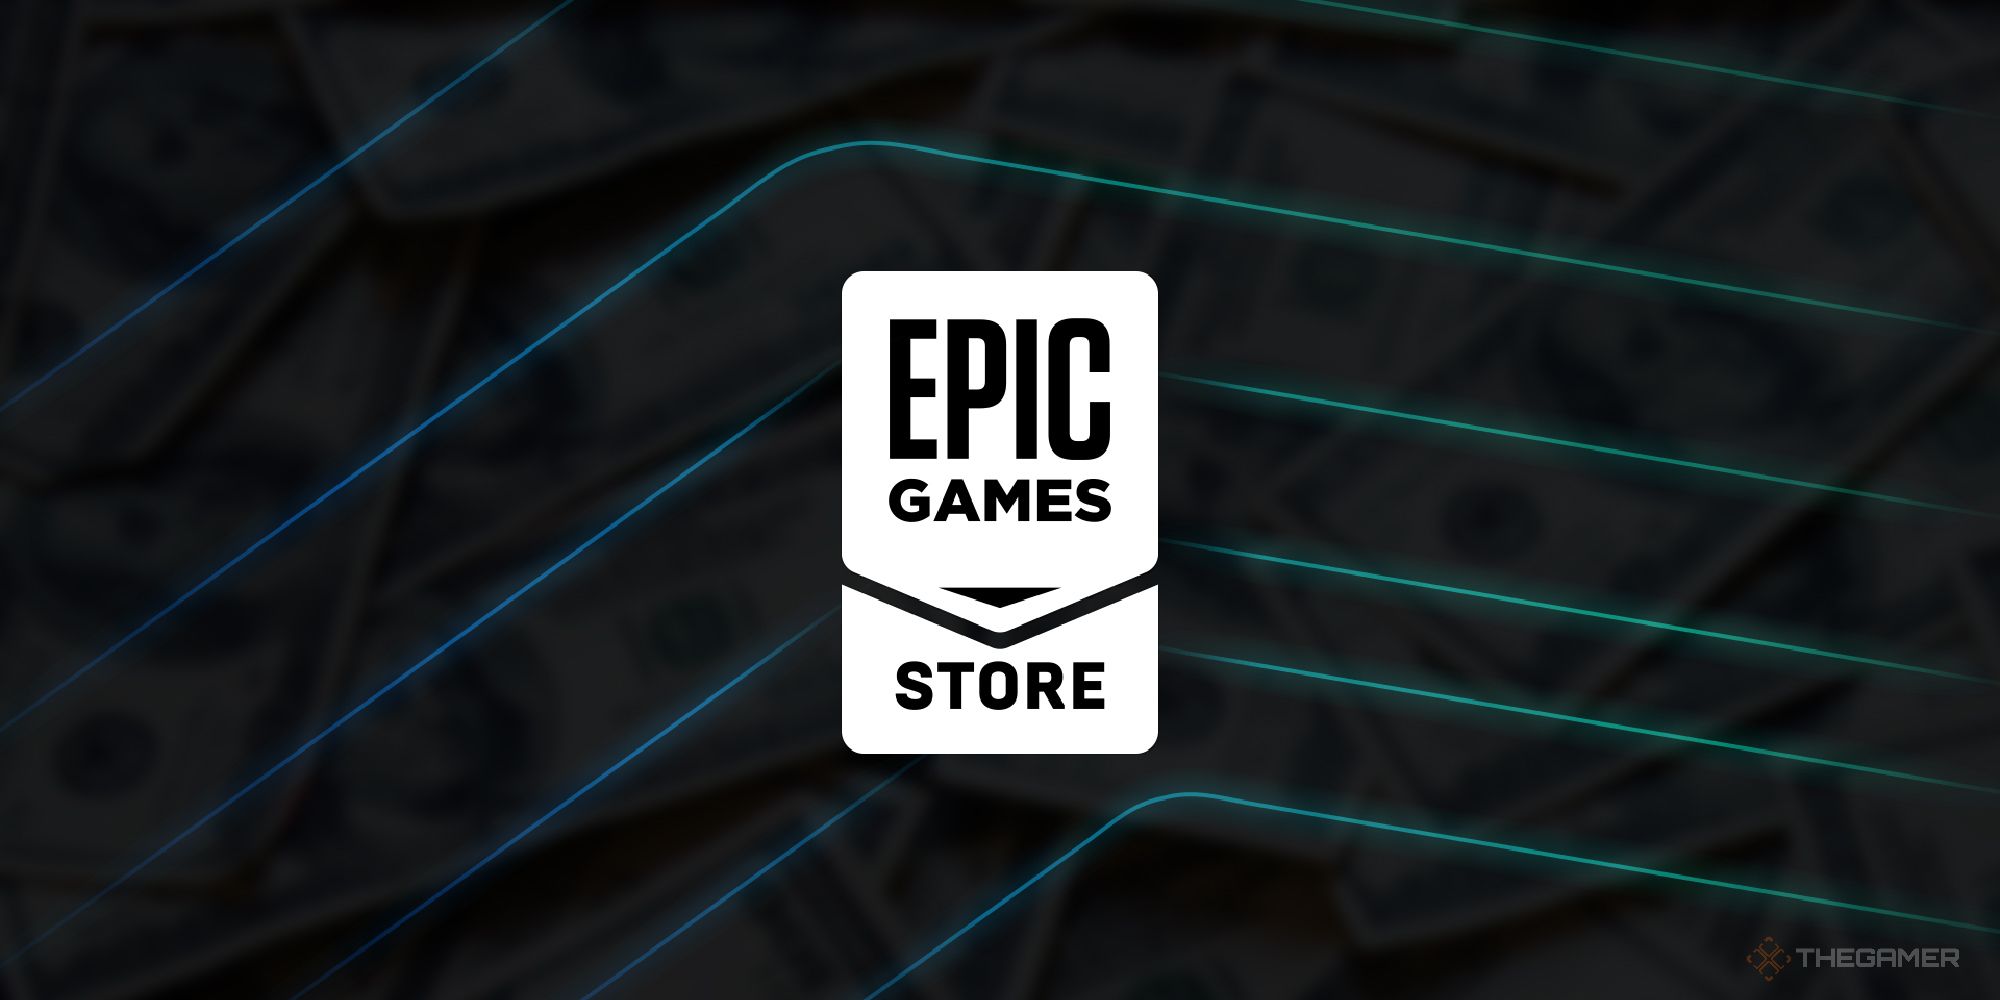 epic games store logo on a fabric background